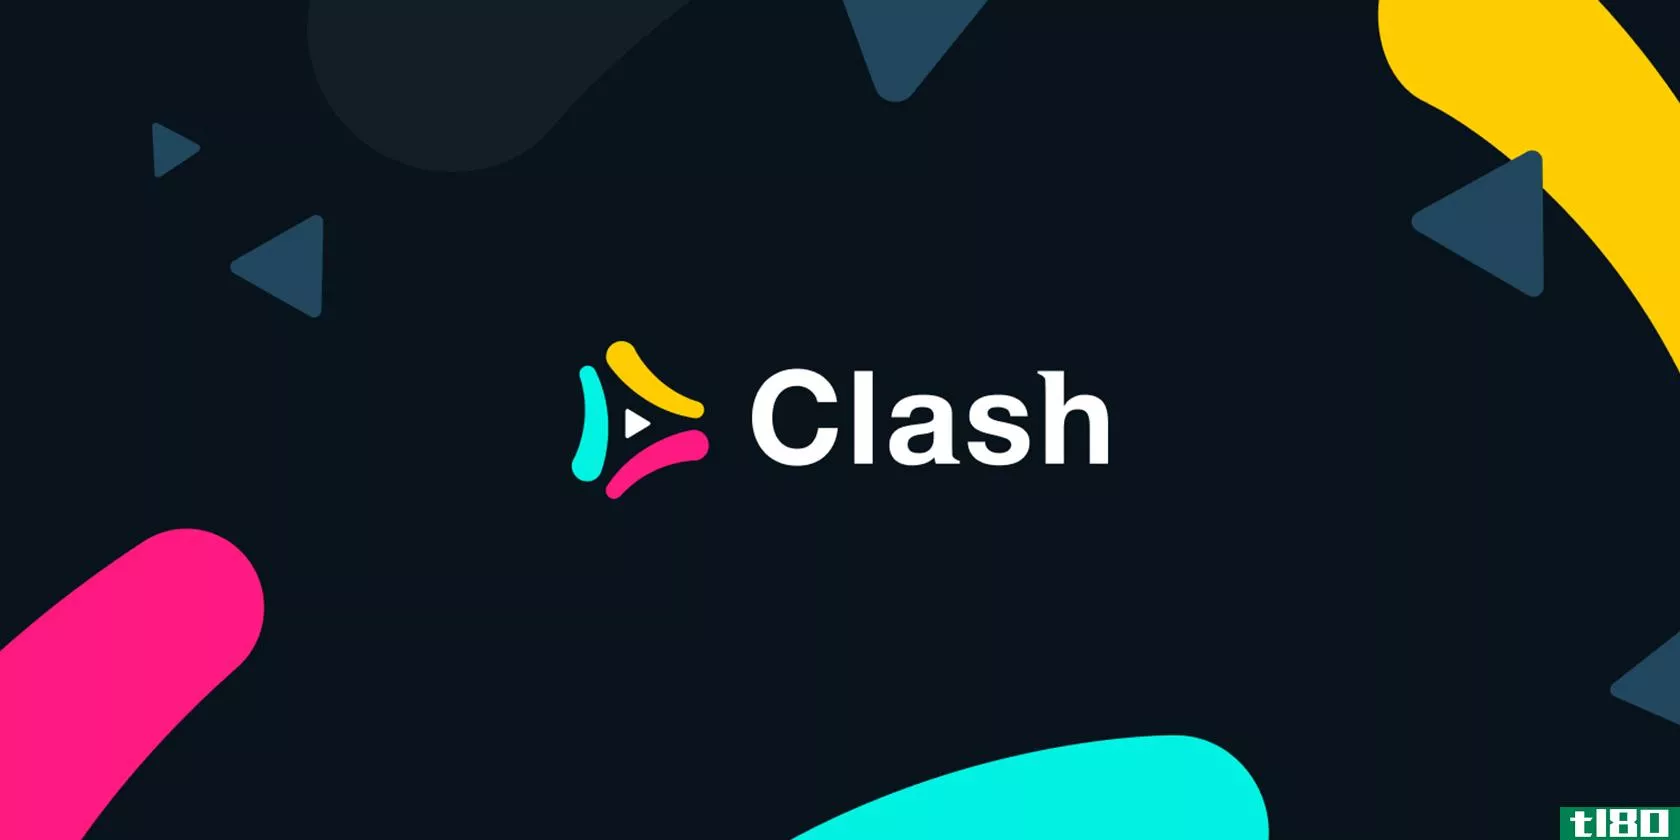 The colorful logo of video-sharing app Clash